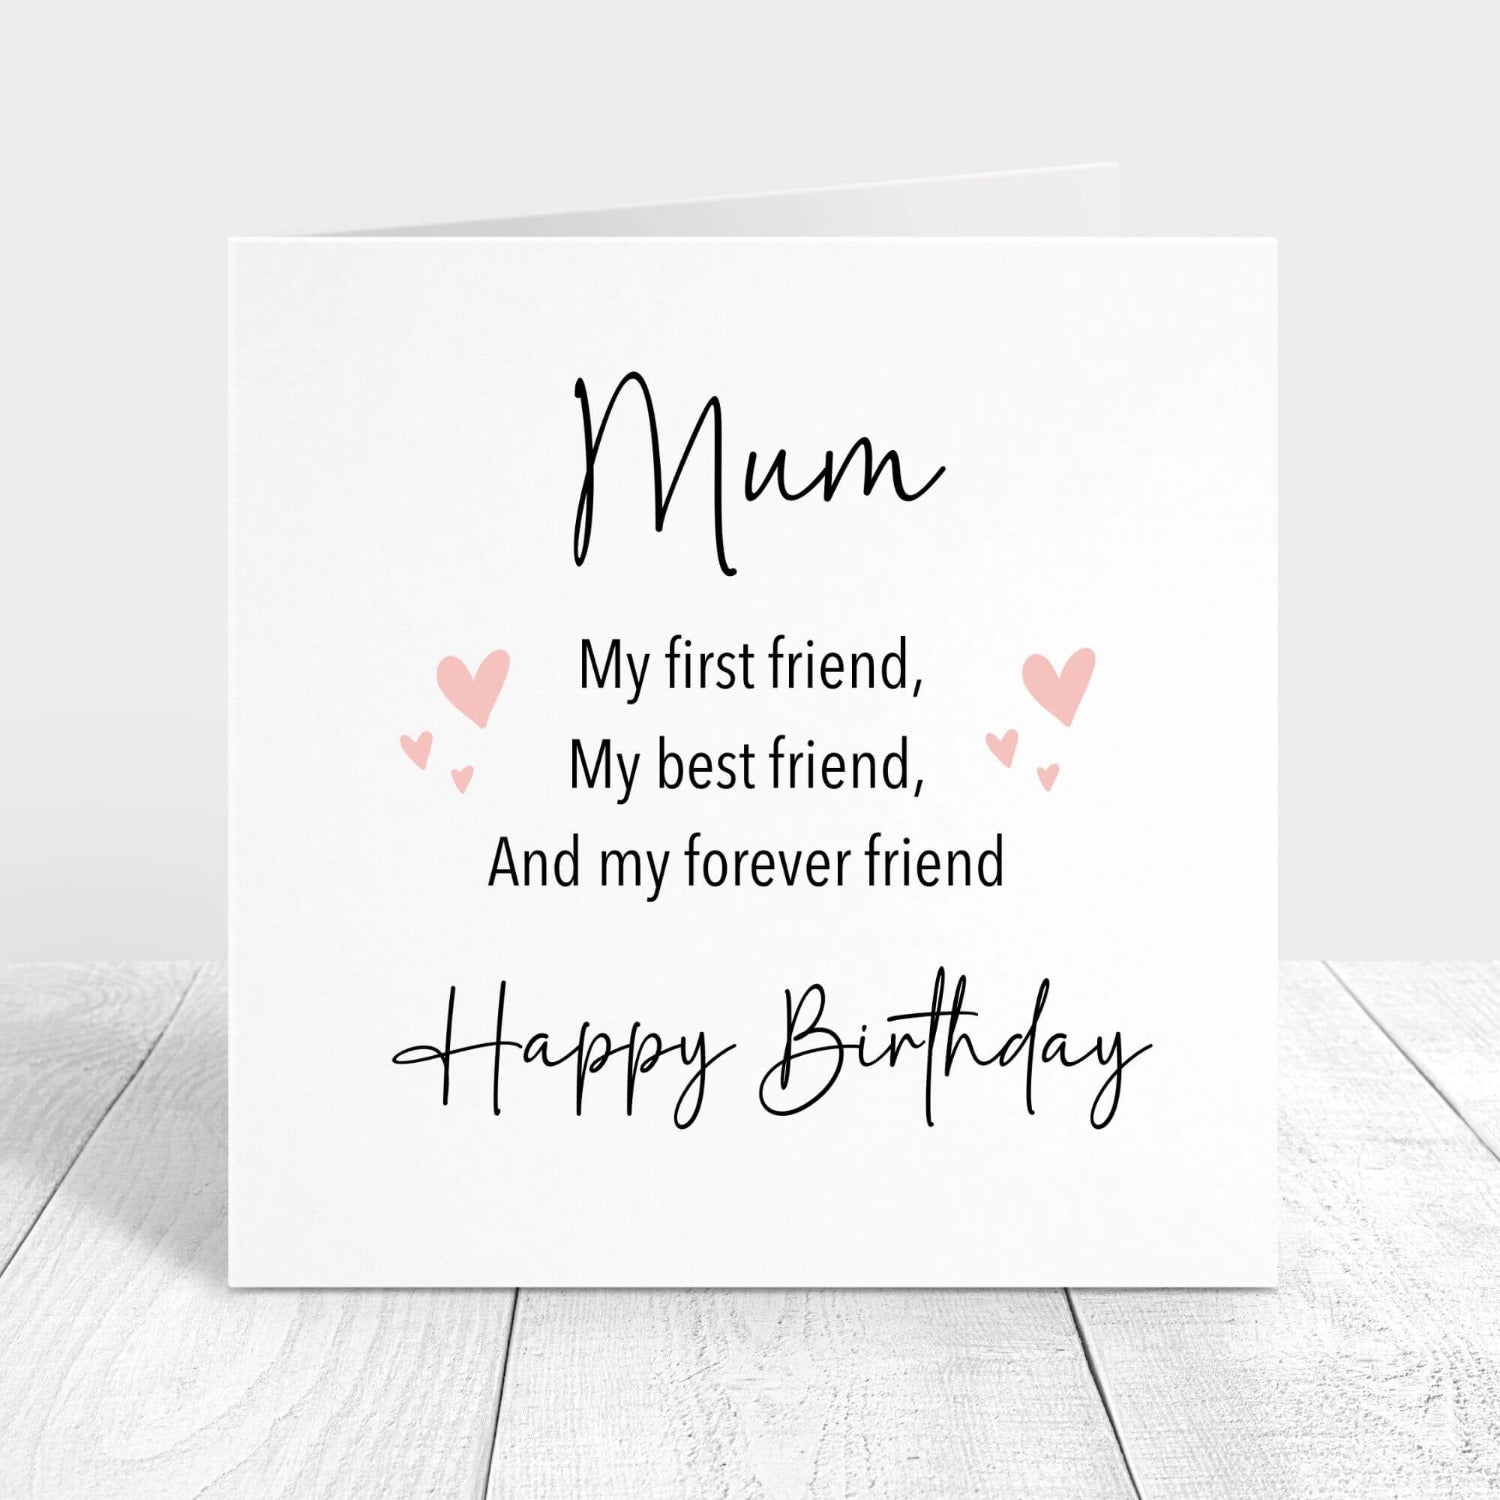 personalised birthday card for mum - my first and forever friend